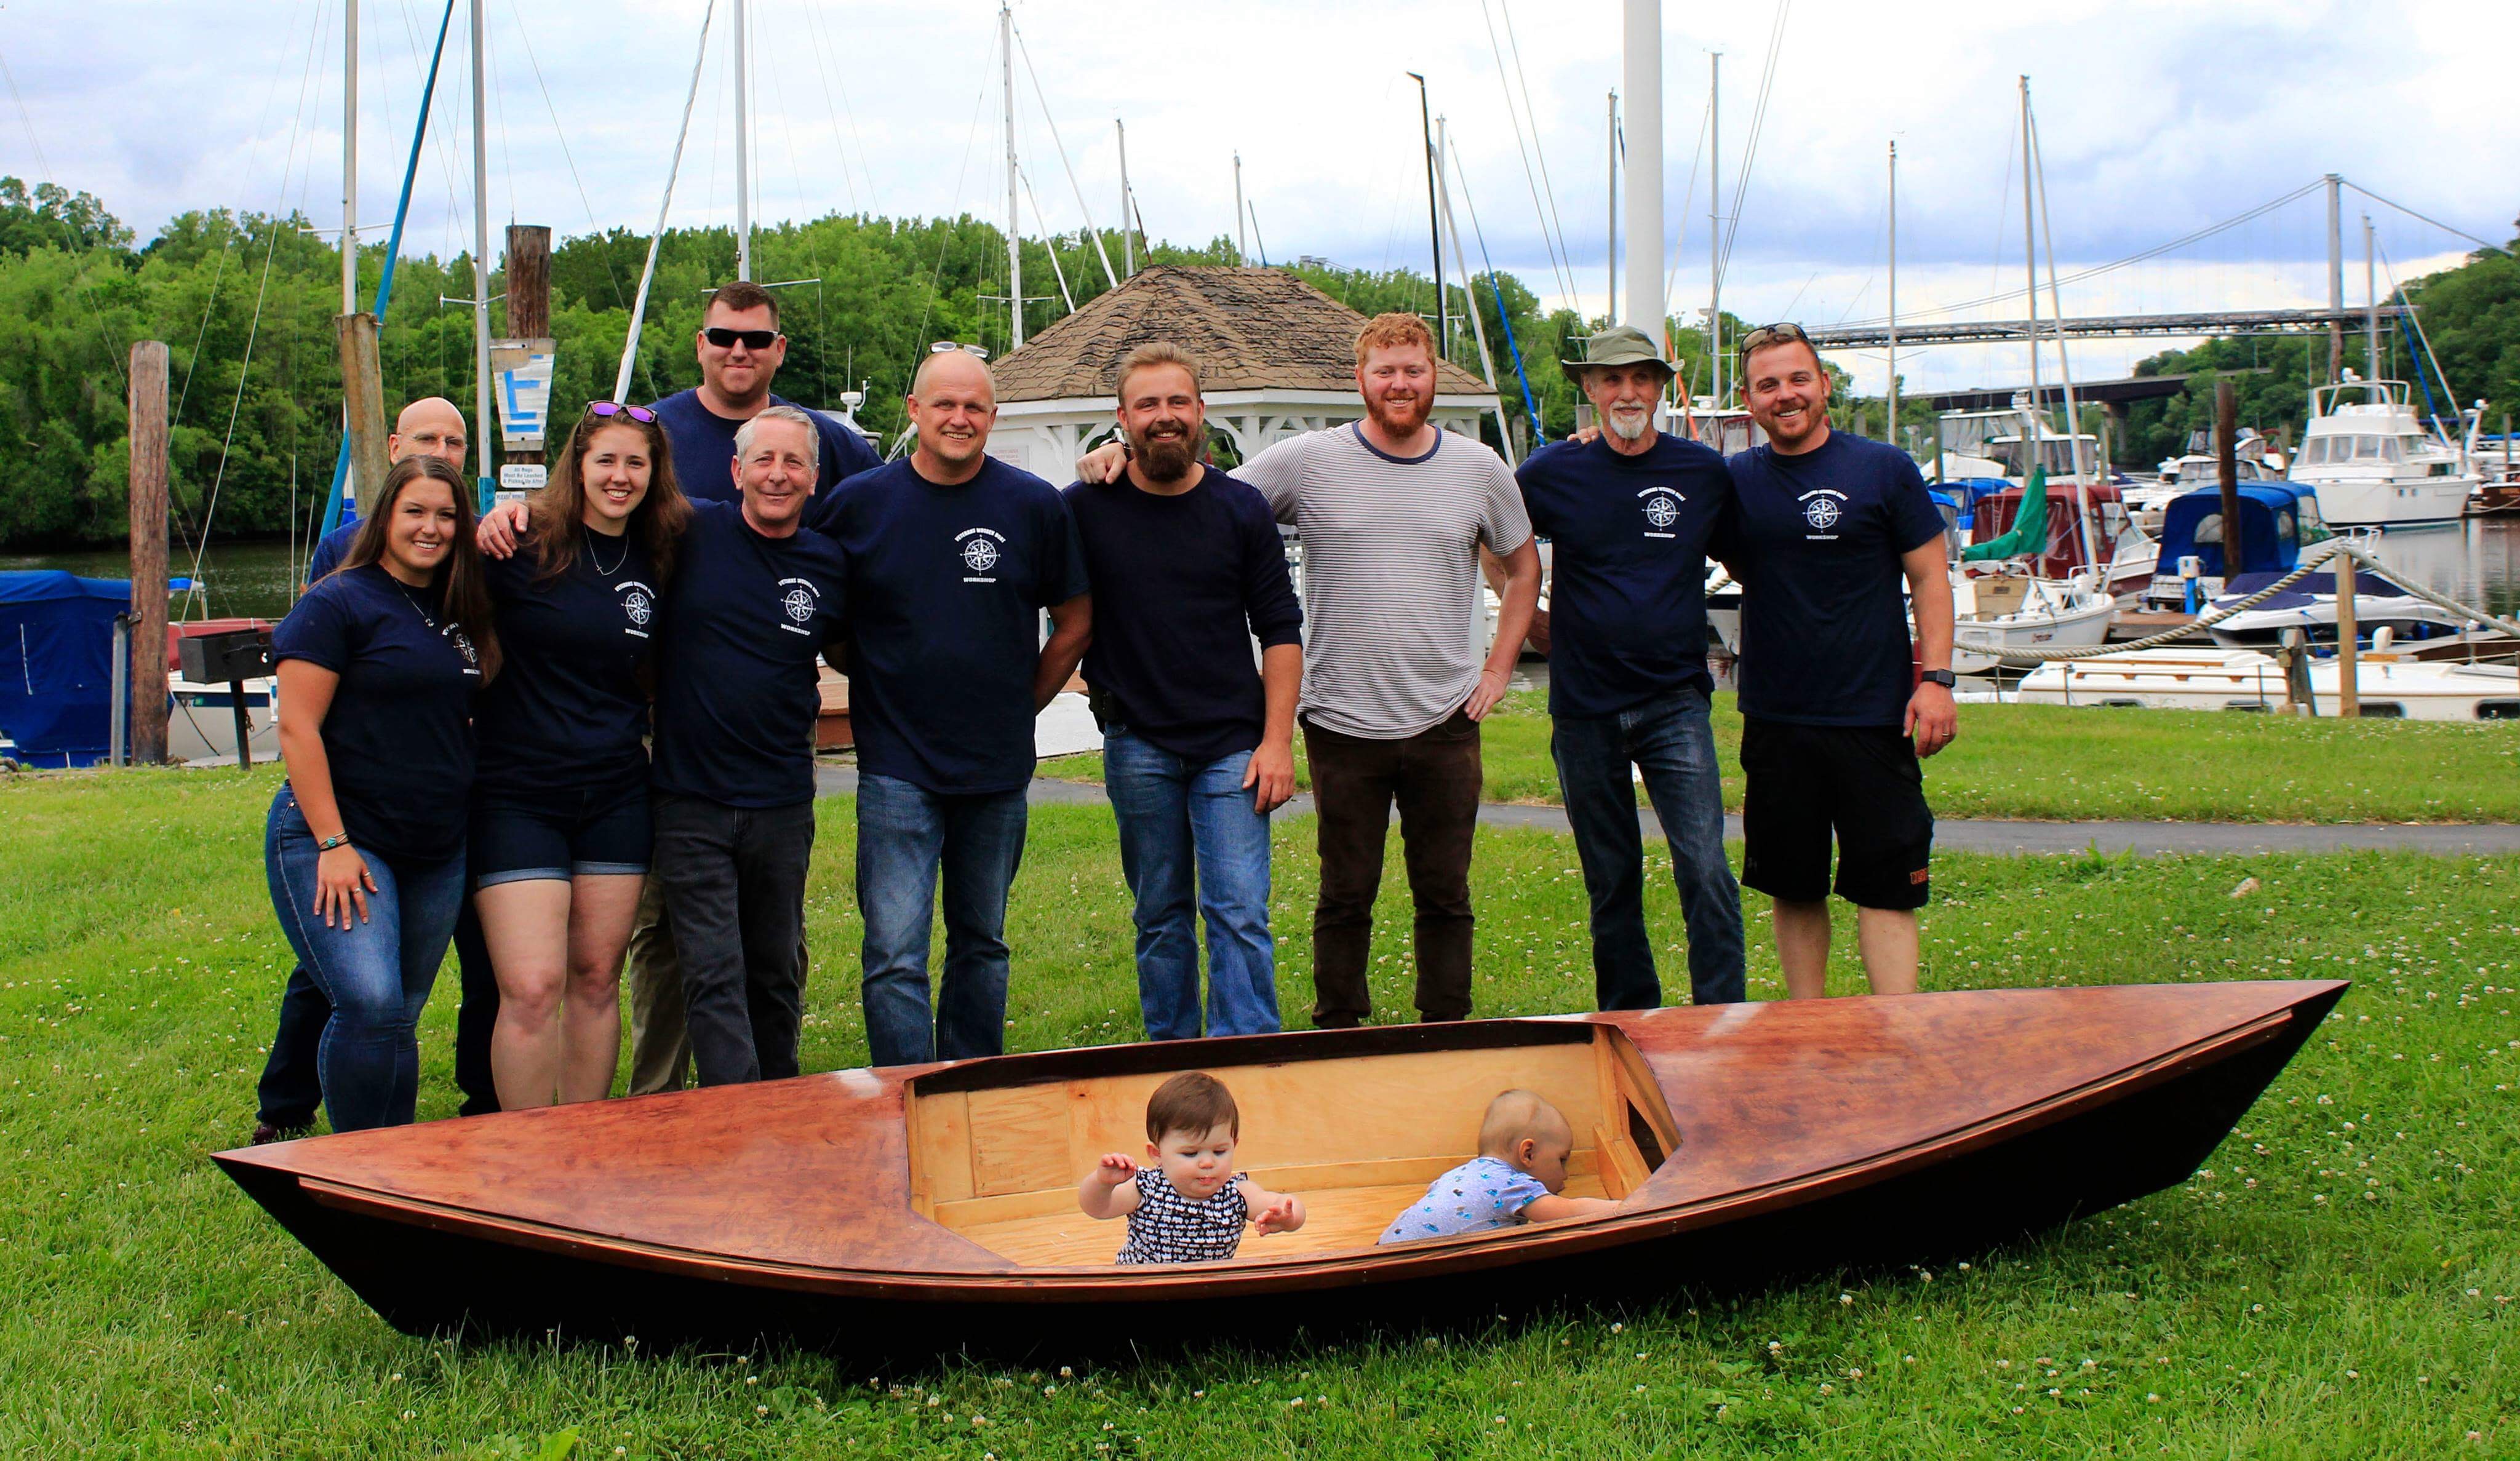 Our members standing next to a one of the kayaks they built this year.